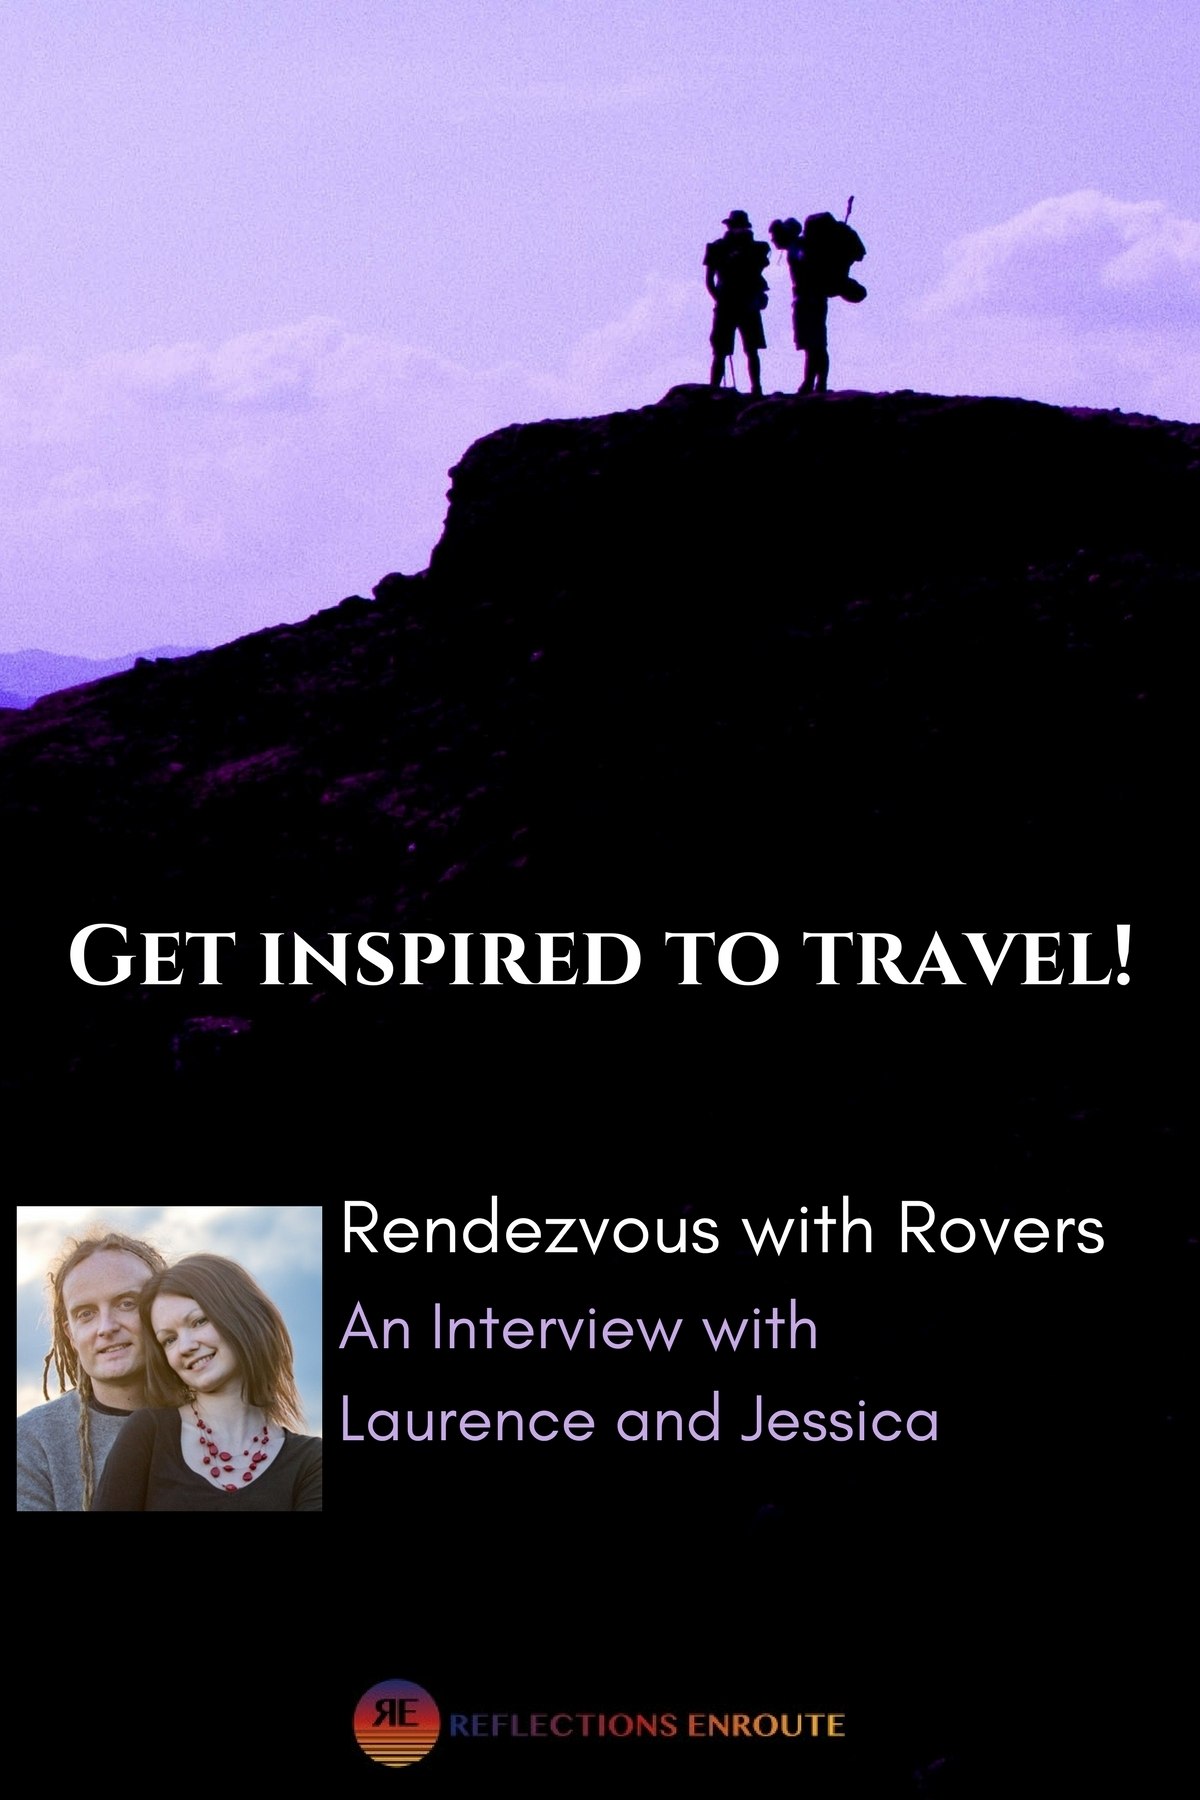 Rendezvous with Jessica and Laurence.